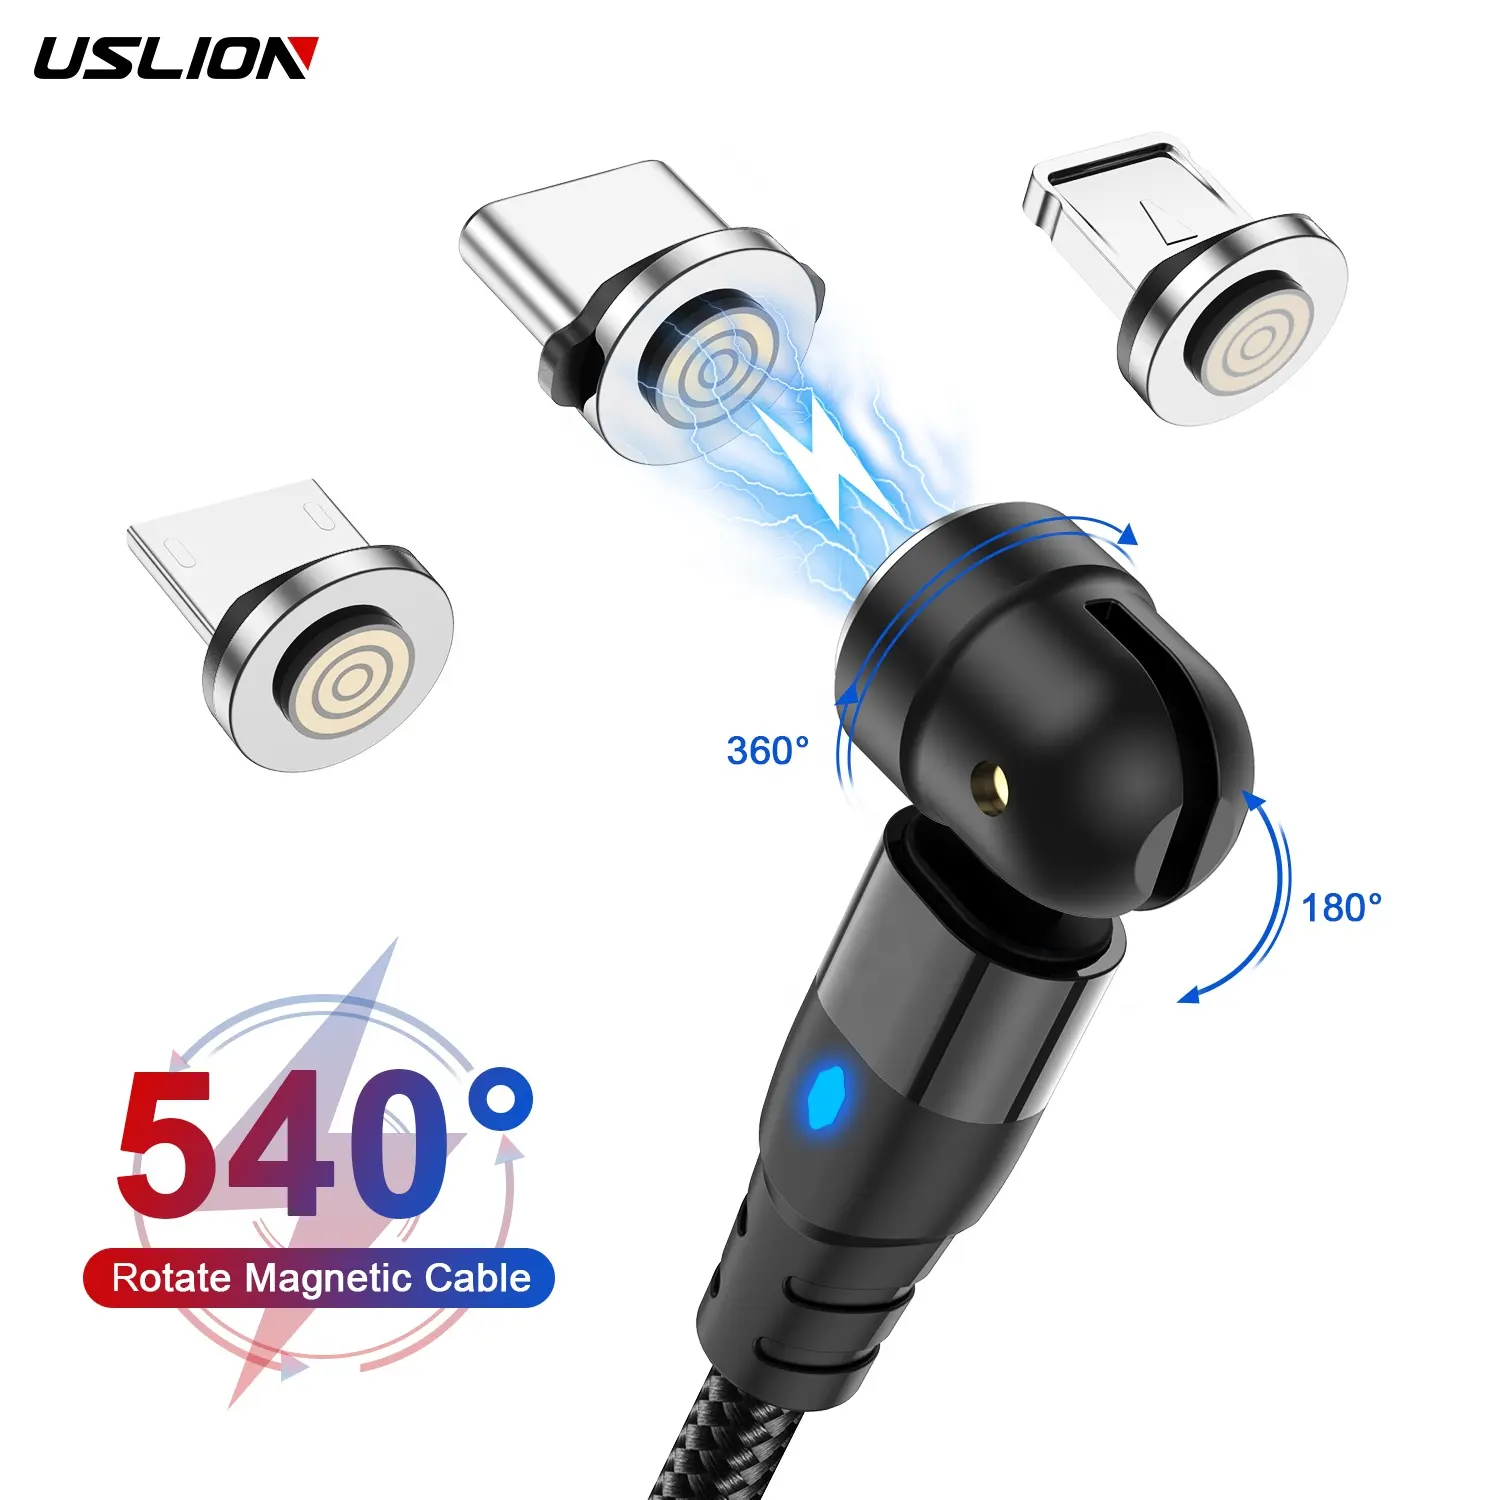 USLION 540 Rotate 3 in 1 USB Magnetic Cable 3AFast Charging Micro USB Type C Cable Magnet Charger Phone For iPhone